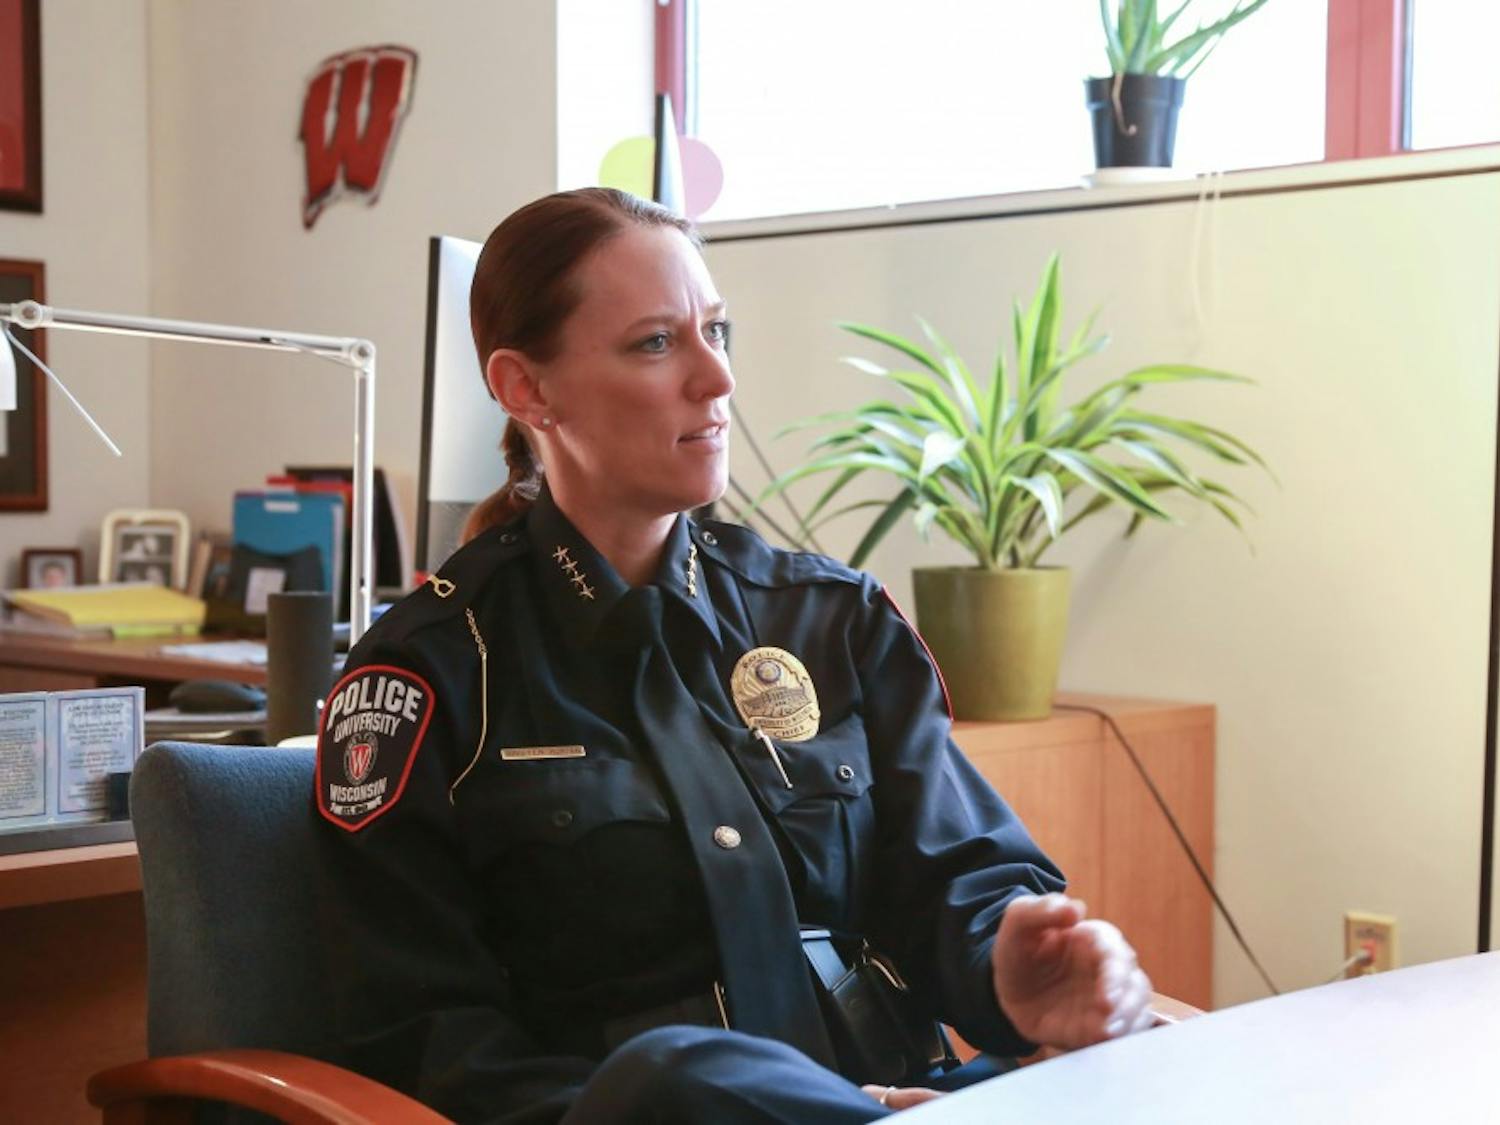 UWPD Chief Kristen Roman posted a blog post Monday addressing student concerns surrounding contacting UWPD.